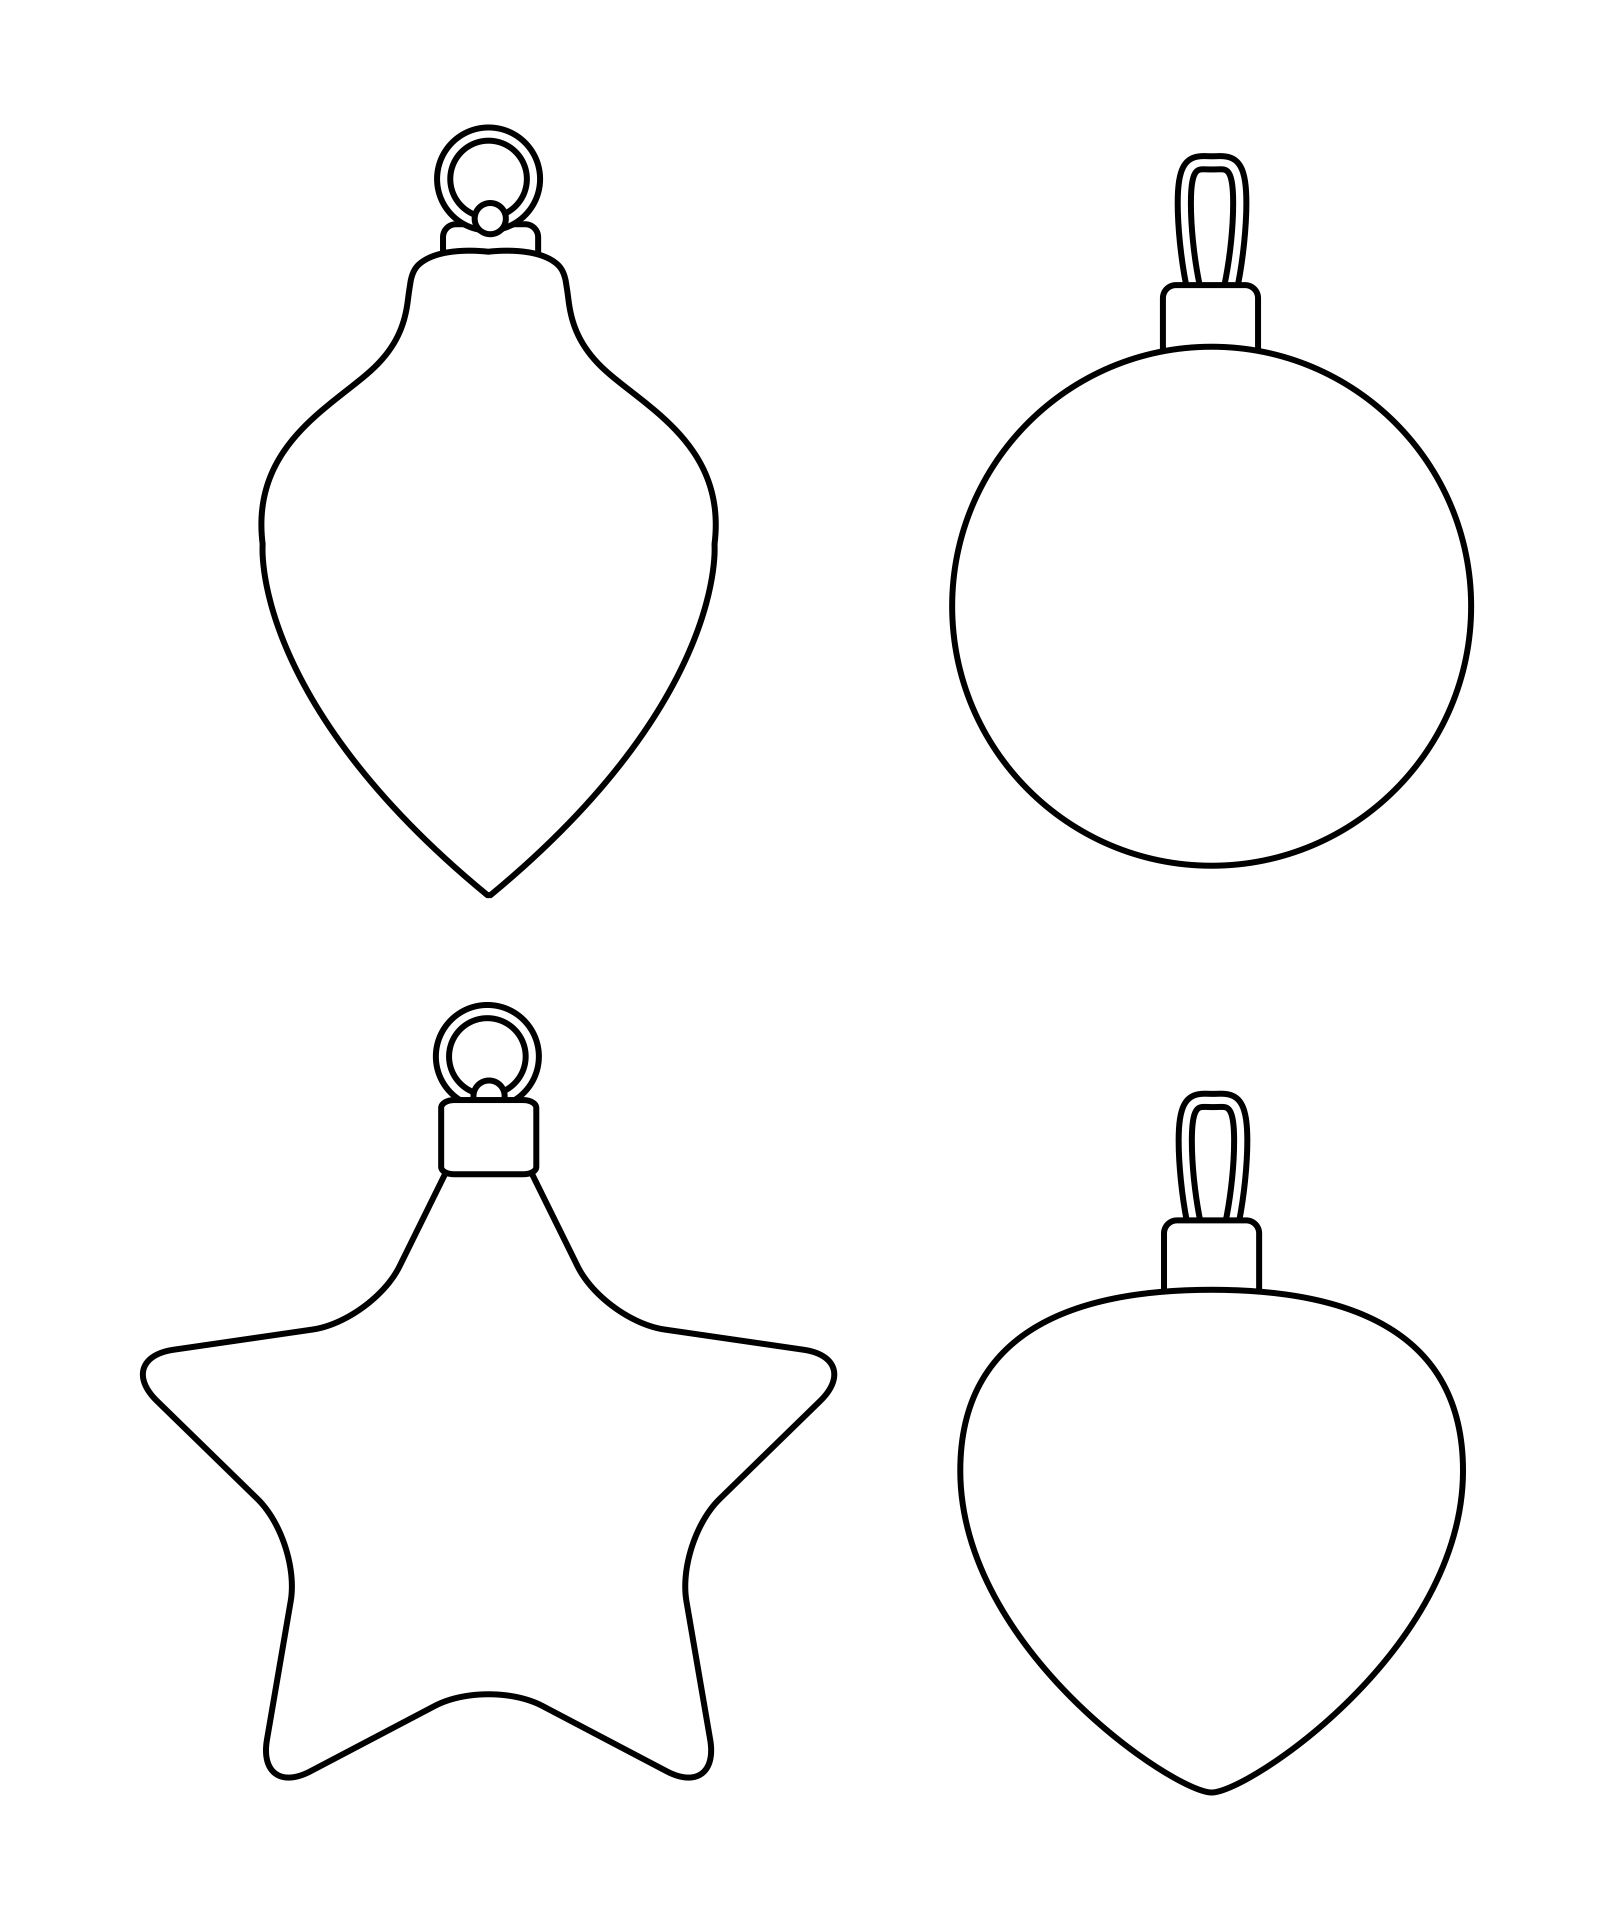 7 Best Images of Printable Christmas Ornament Templates Christmas